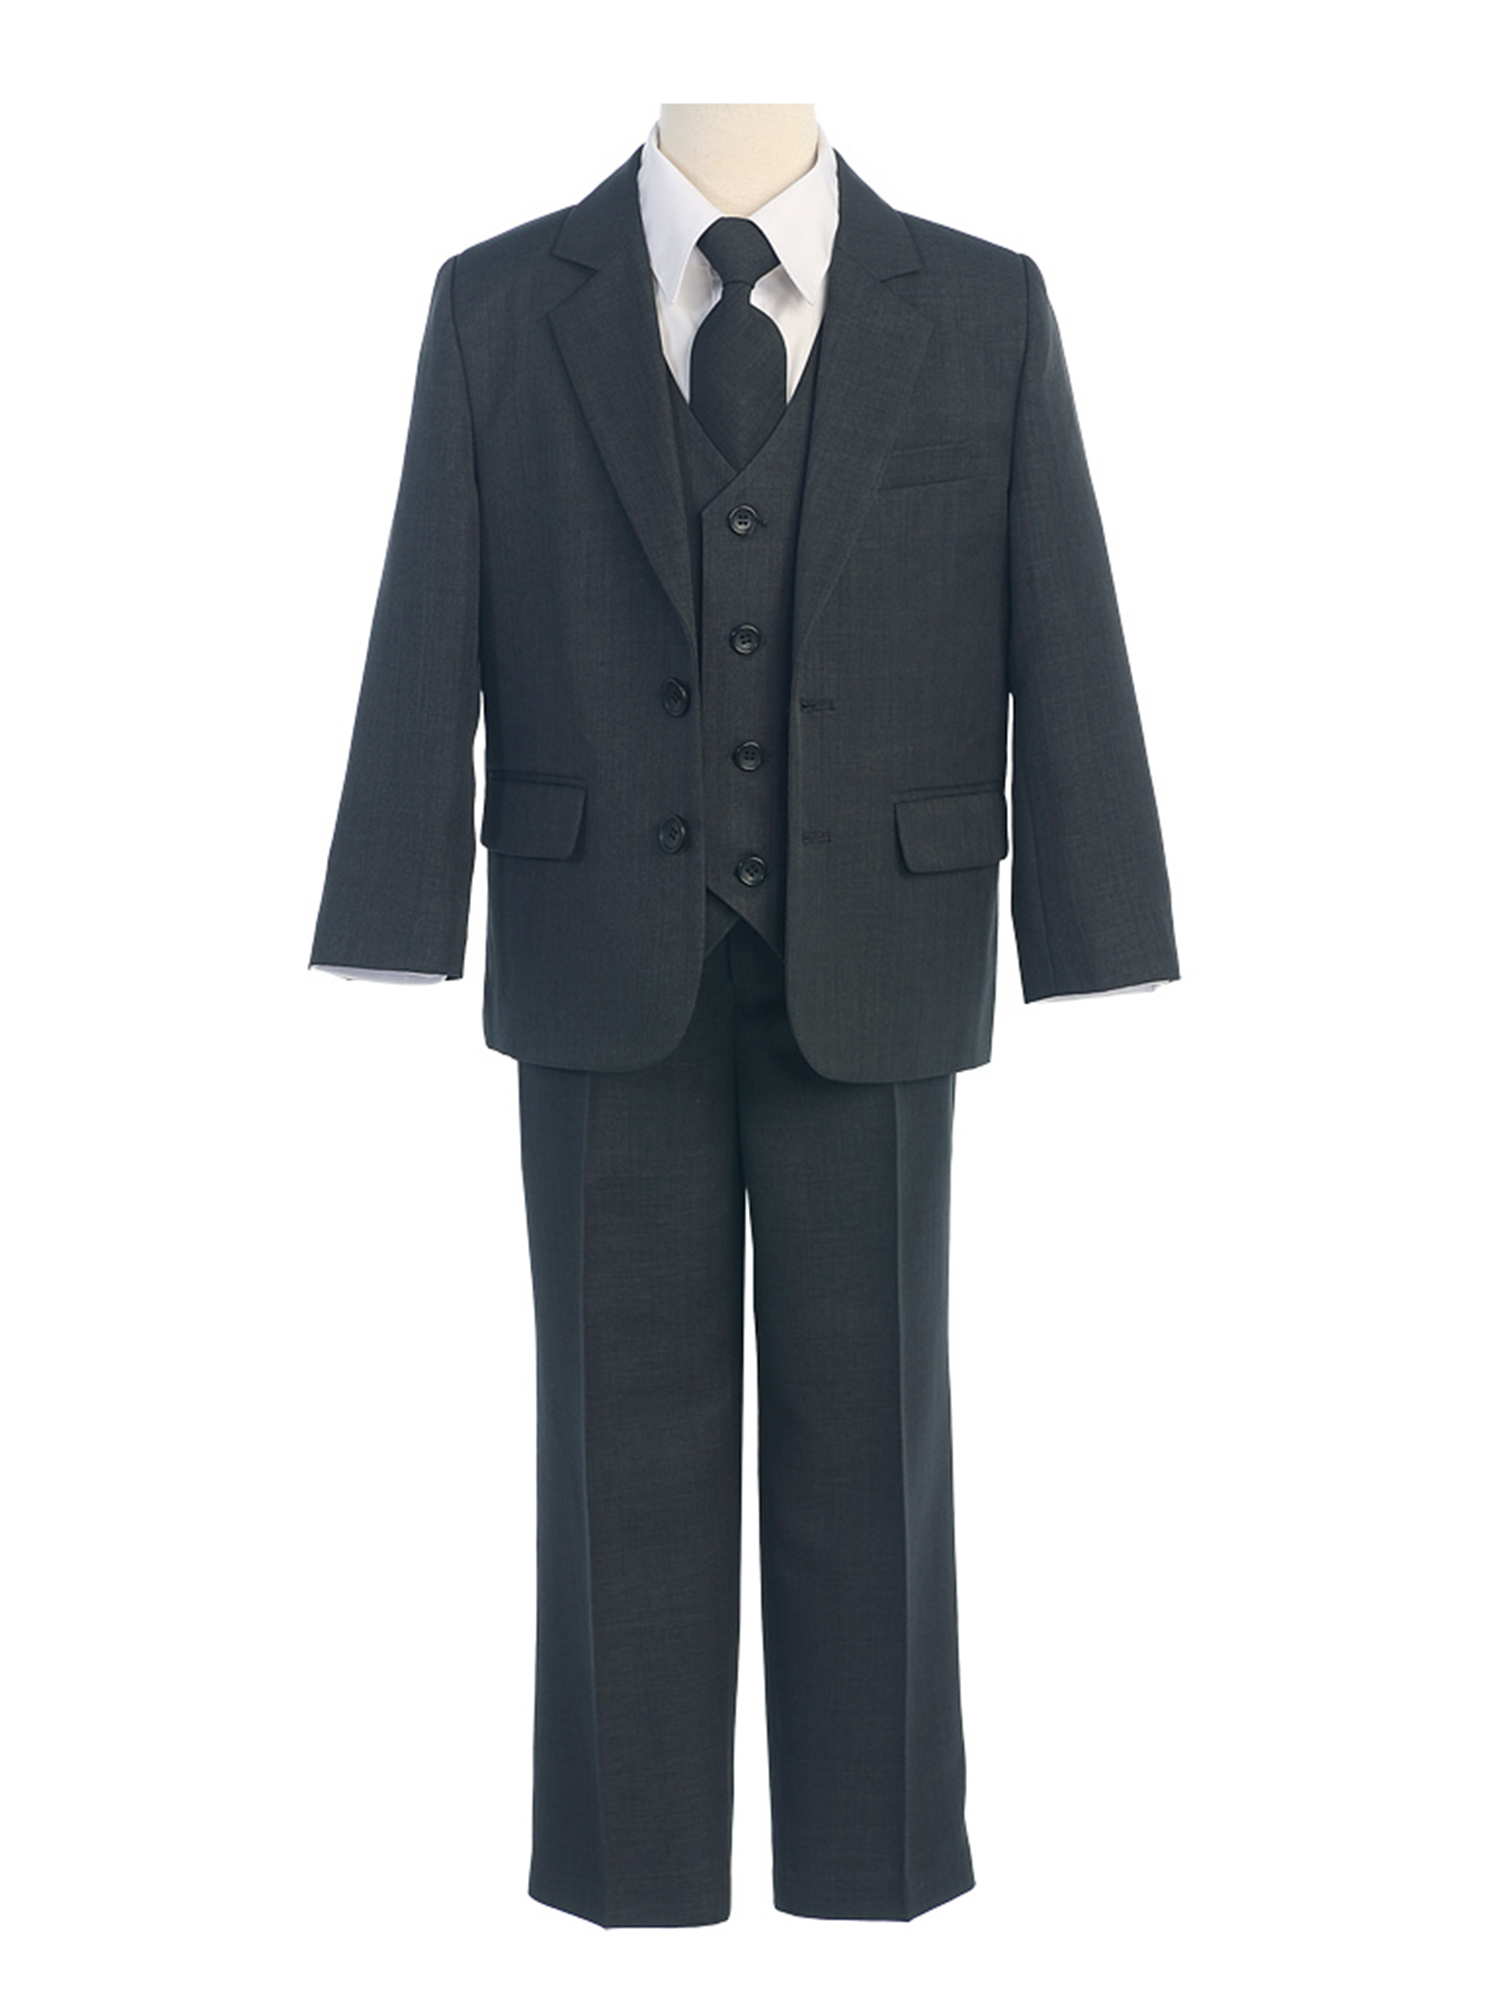 COLE Boys Suit with Shirt and Vest (5-Piece) - Charcoal Grey - Size 2